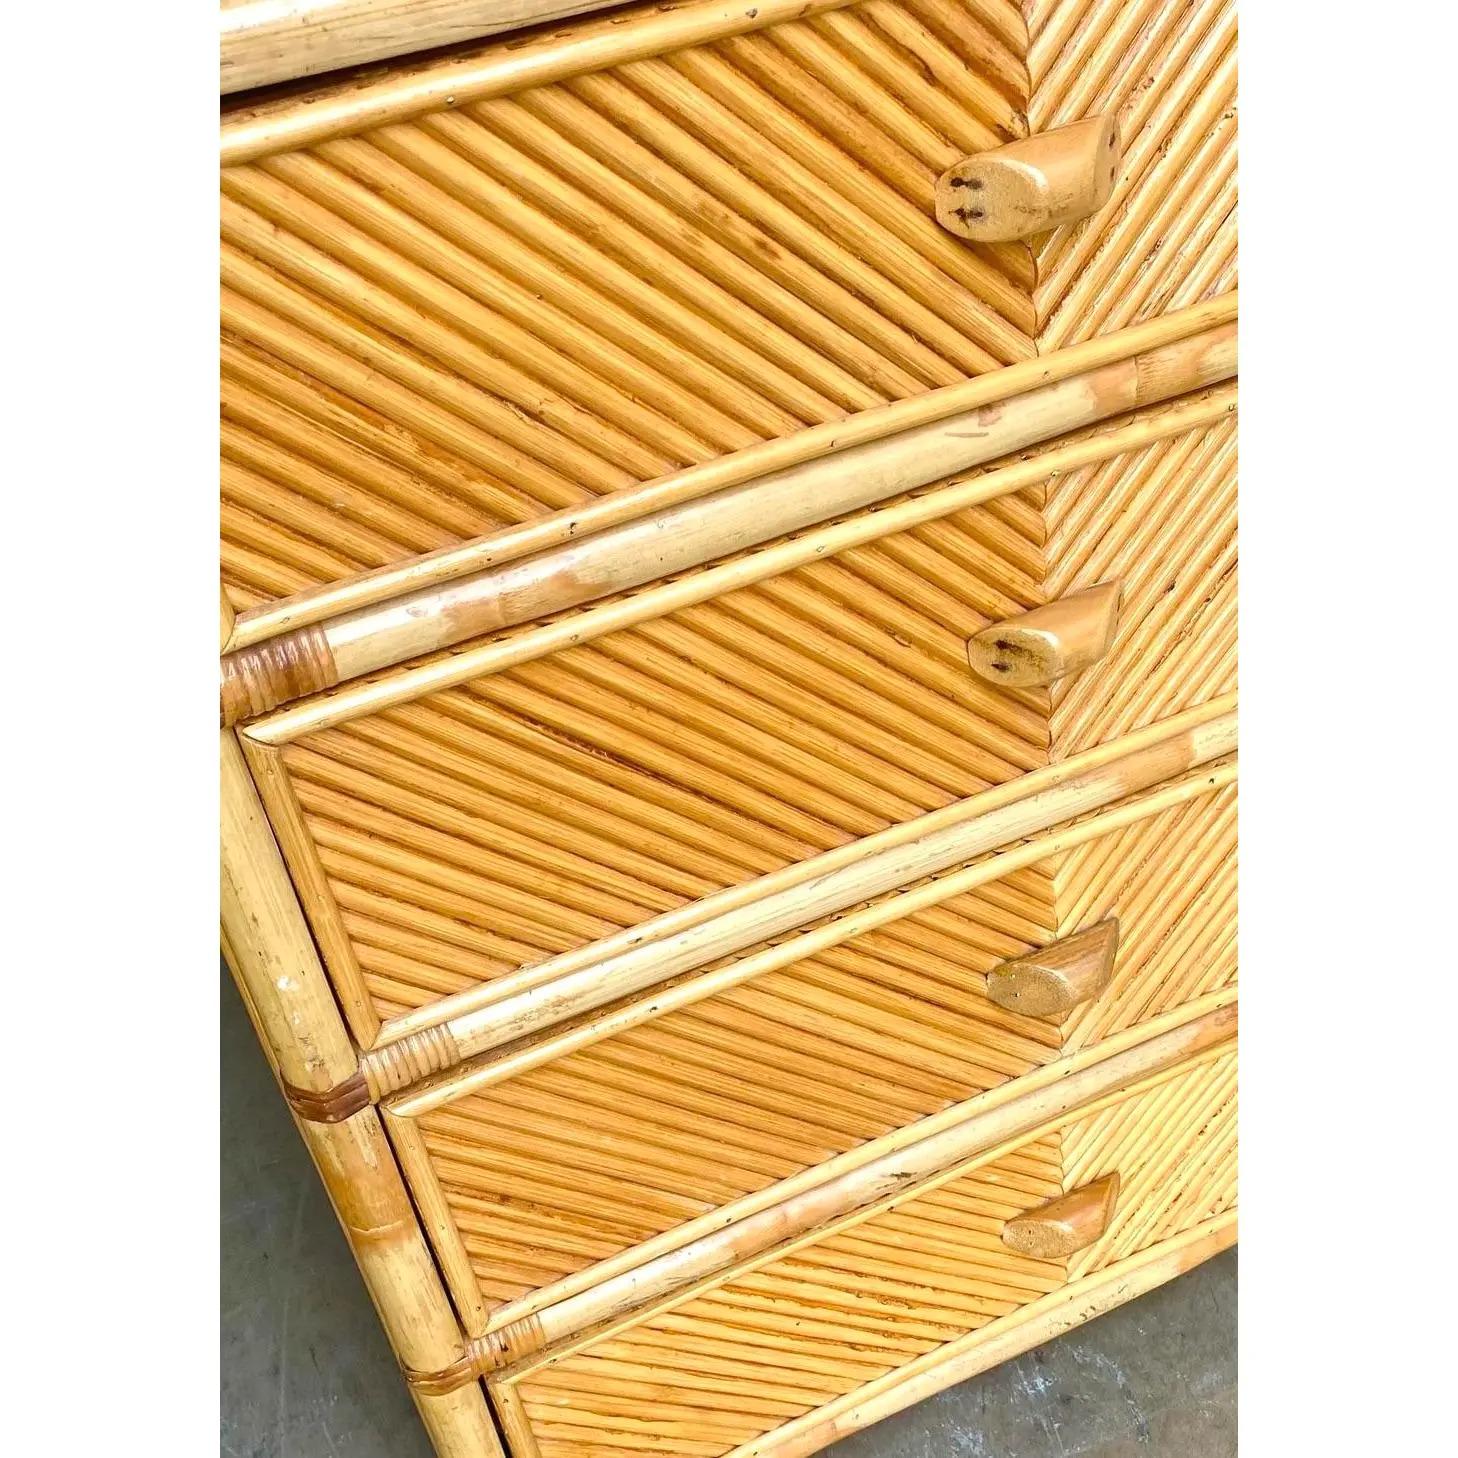 Vintage coastal 8 drawer dresser. A gorgeous pencil reed in a Chevron design. Acquired from a Palm Beach estate.